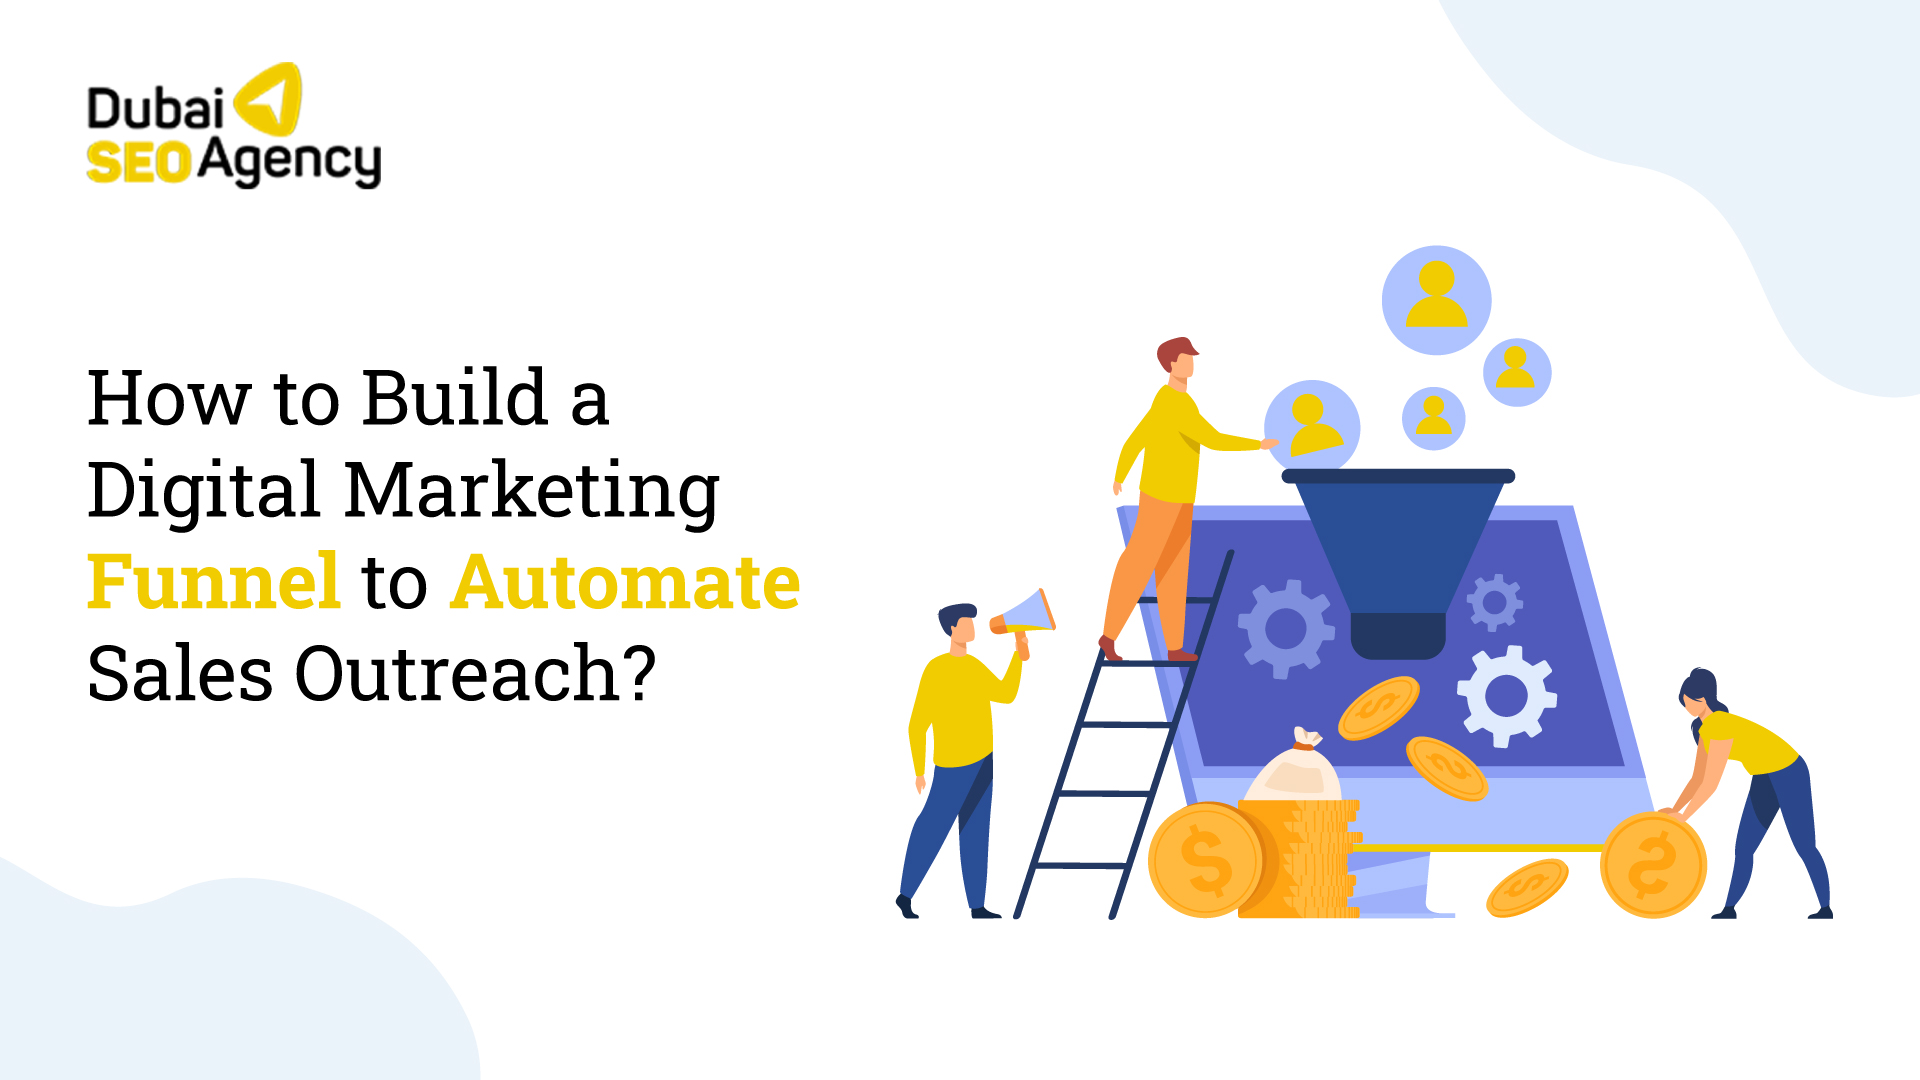 How to Build a Digital Marketing Funnel to Automate Sales Outreach?